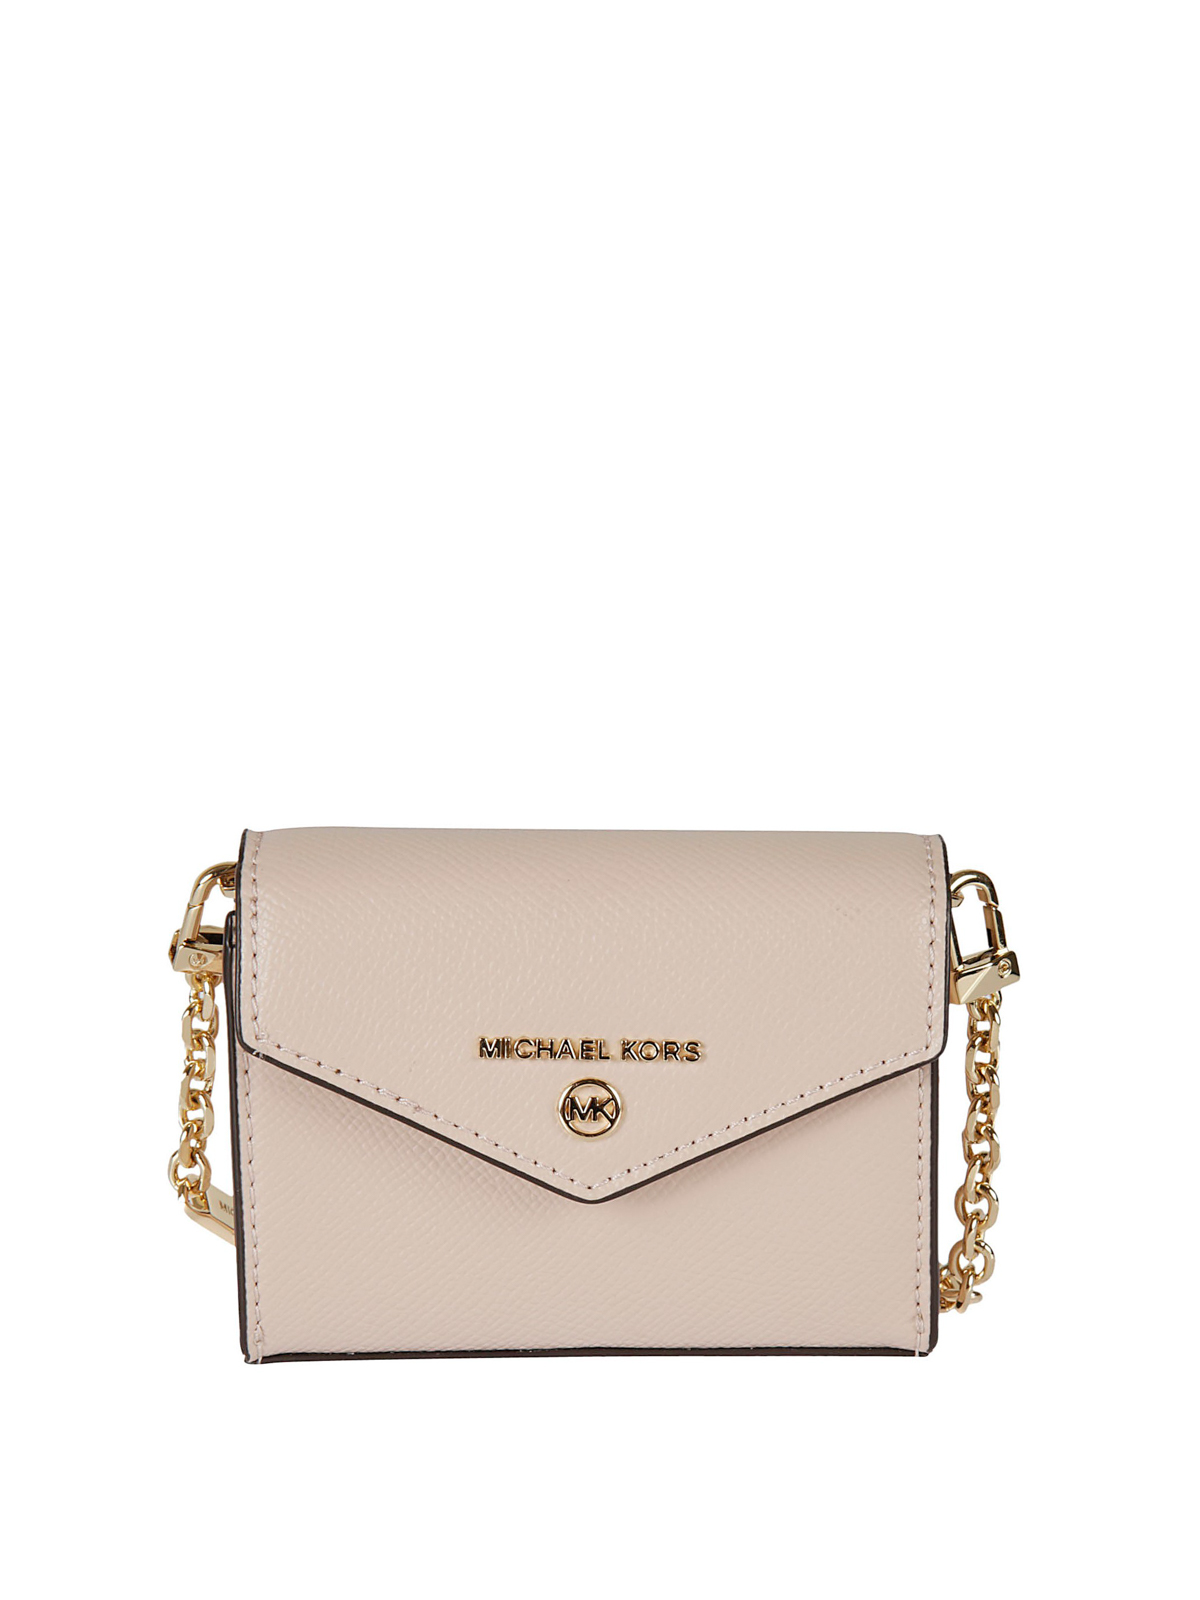 michael kors card holder with chain